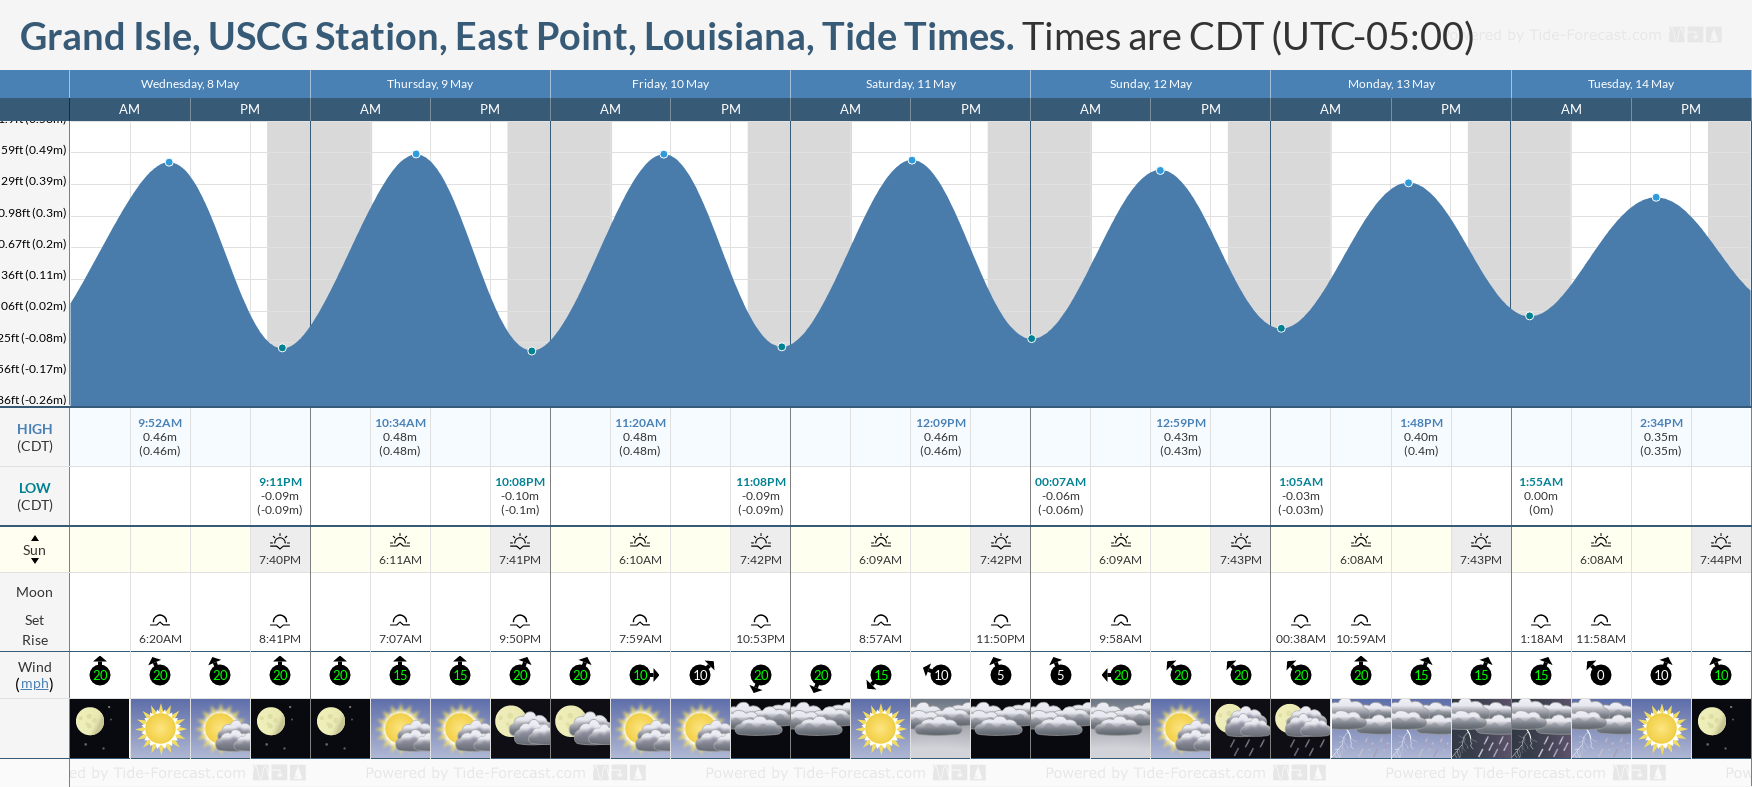 Grand Isle, USCG Station, East Point, Louisiana Tide Chart including high and low tide times for the next 7 days